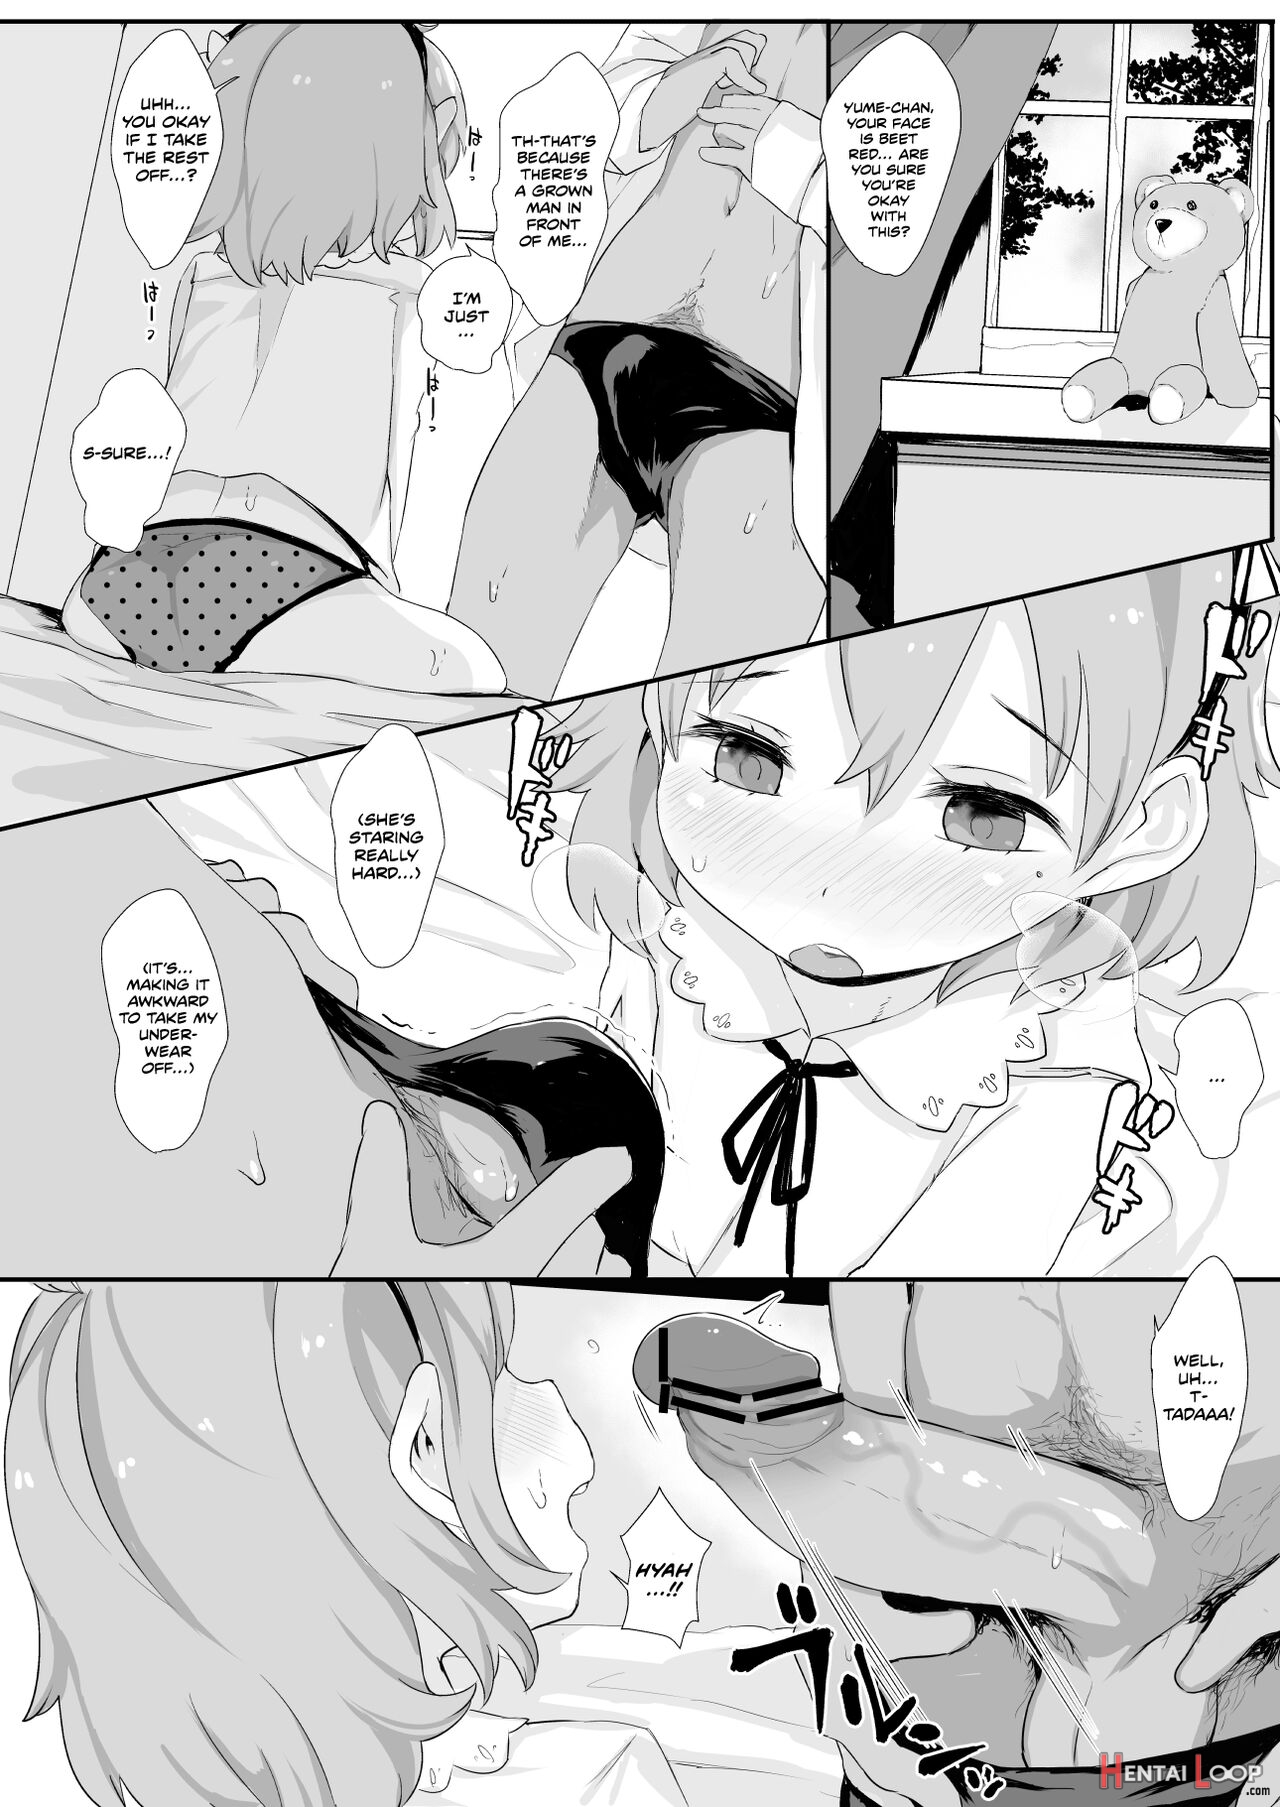 Hot 'n Steamy Babymaking Sex With Yume-chan! page 6